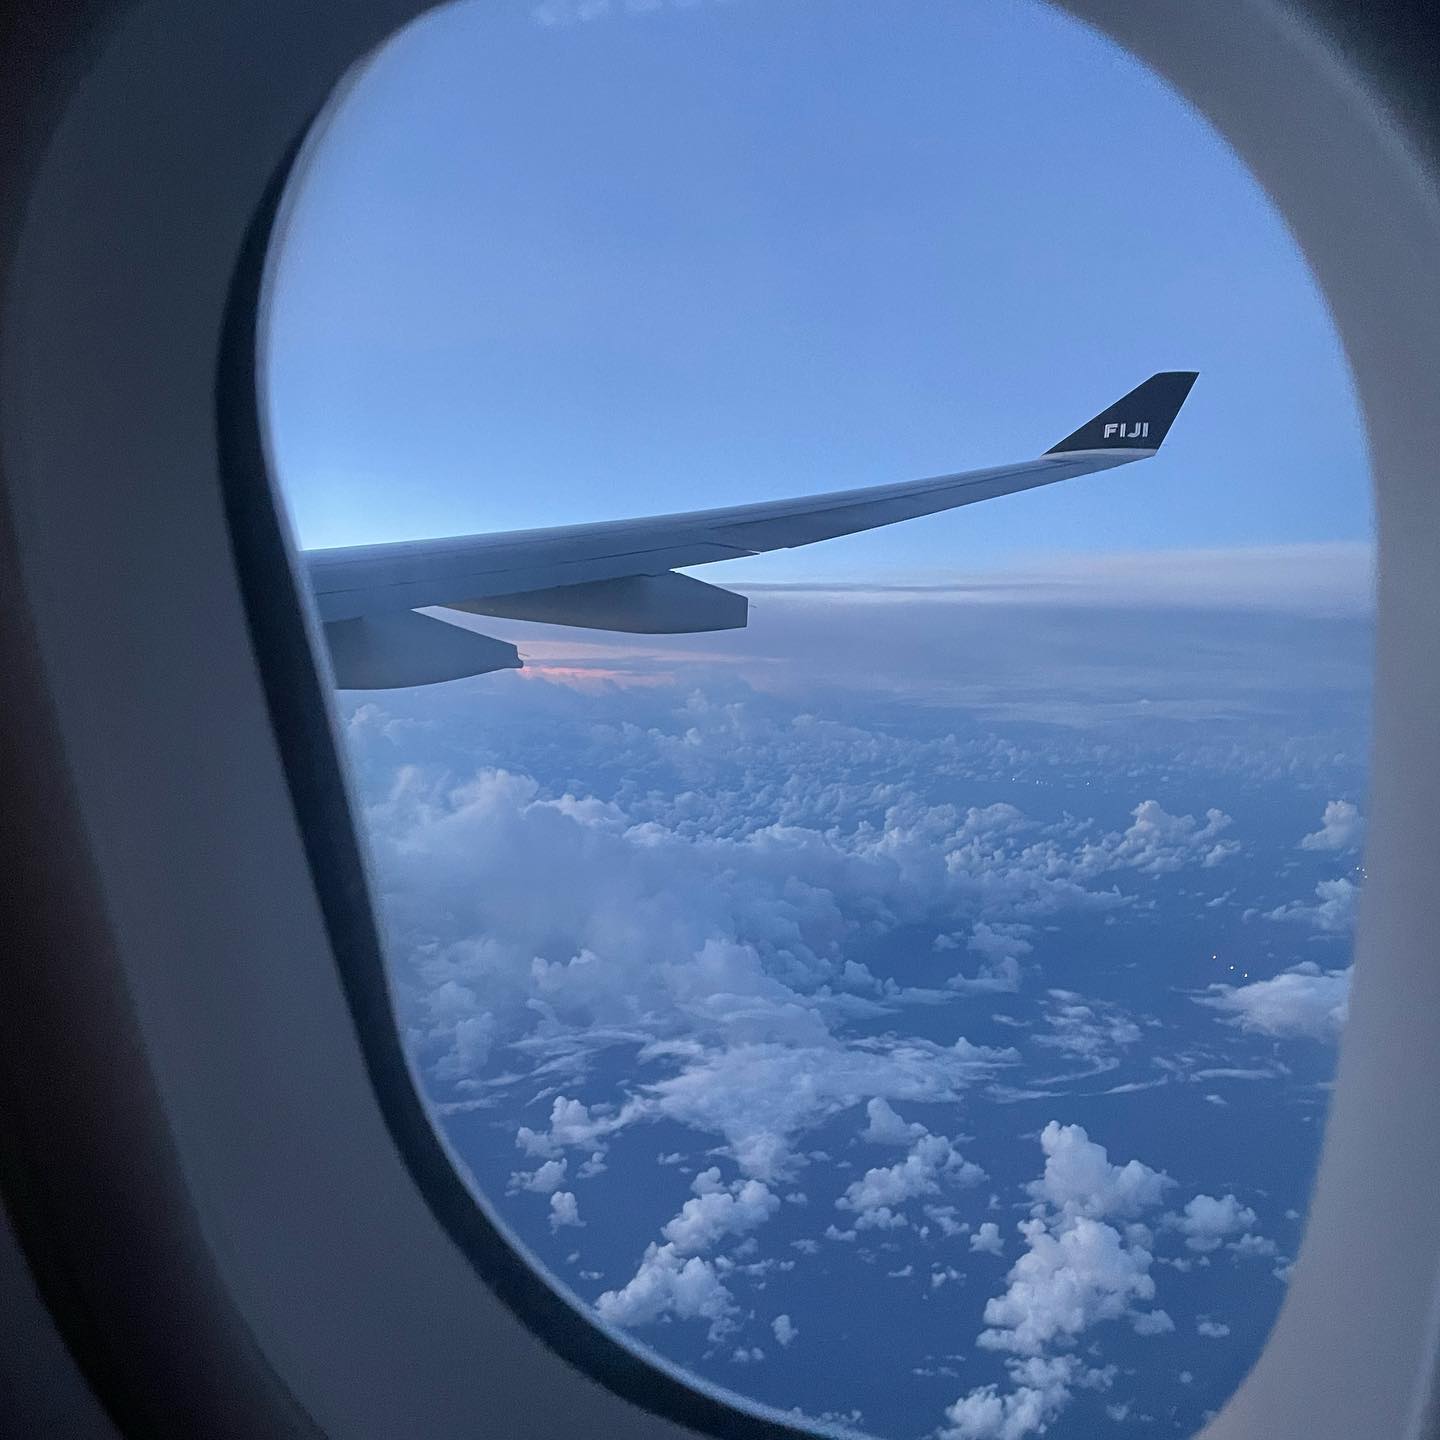 This view I already saw so many times the last 1,5 years! And it never gets boring 😍 
I hope to travel for much longer. But after Fiji and Australia.. Ow boy… 🙈 
I love it that I went all the way to the other side of the planet. But my bank account is not happy 🤣 
Now I’m in Bali I’m going to do some more slow traveling again. But unfortunately many countries in Asia only have 30 day visas. So traveling very slow is not possible. Also in Indonesia I’m going to extend my visa for only once. And after 2 months I need to leave the country 😭 Of course 2 months is not enough for Indonesia. So probably I fly back to Malaysia or Singapore with the cheapest flight and after that back to Indonesia! 👍🏻👍🏻 Because I want to see Lombok, Flores and the Komodo Islands and maybe Java and maybe Sumatra.. 😂 Which Indonesian island is your favorite island? 

#travelislife #roundtheworldtrip #airplaneview #wereldreis #reizen #travelmore #backpackersintheworld #travelingthroughtheworld #reisefieber #reisverslaafd #reiswijven #passportlife #backpackinglife #viewstodiefor #passportready #reizenoverdewereld #instatraveling #igdaily #wanderer #indonesie #travelslow